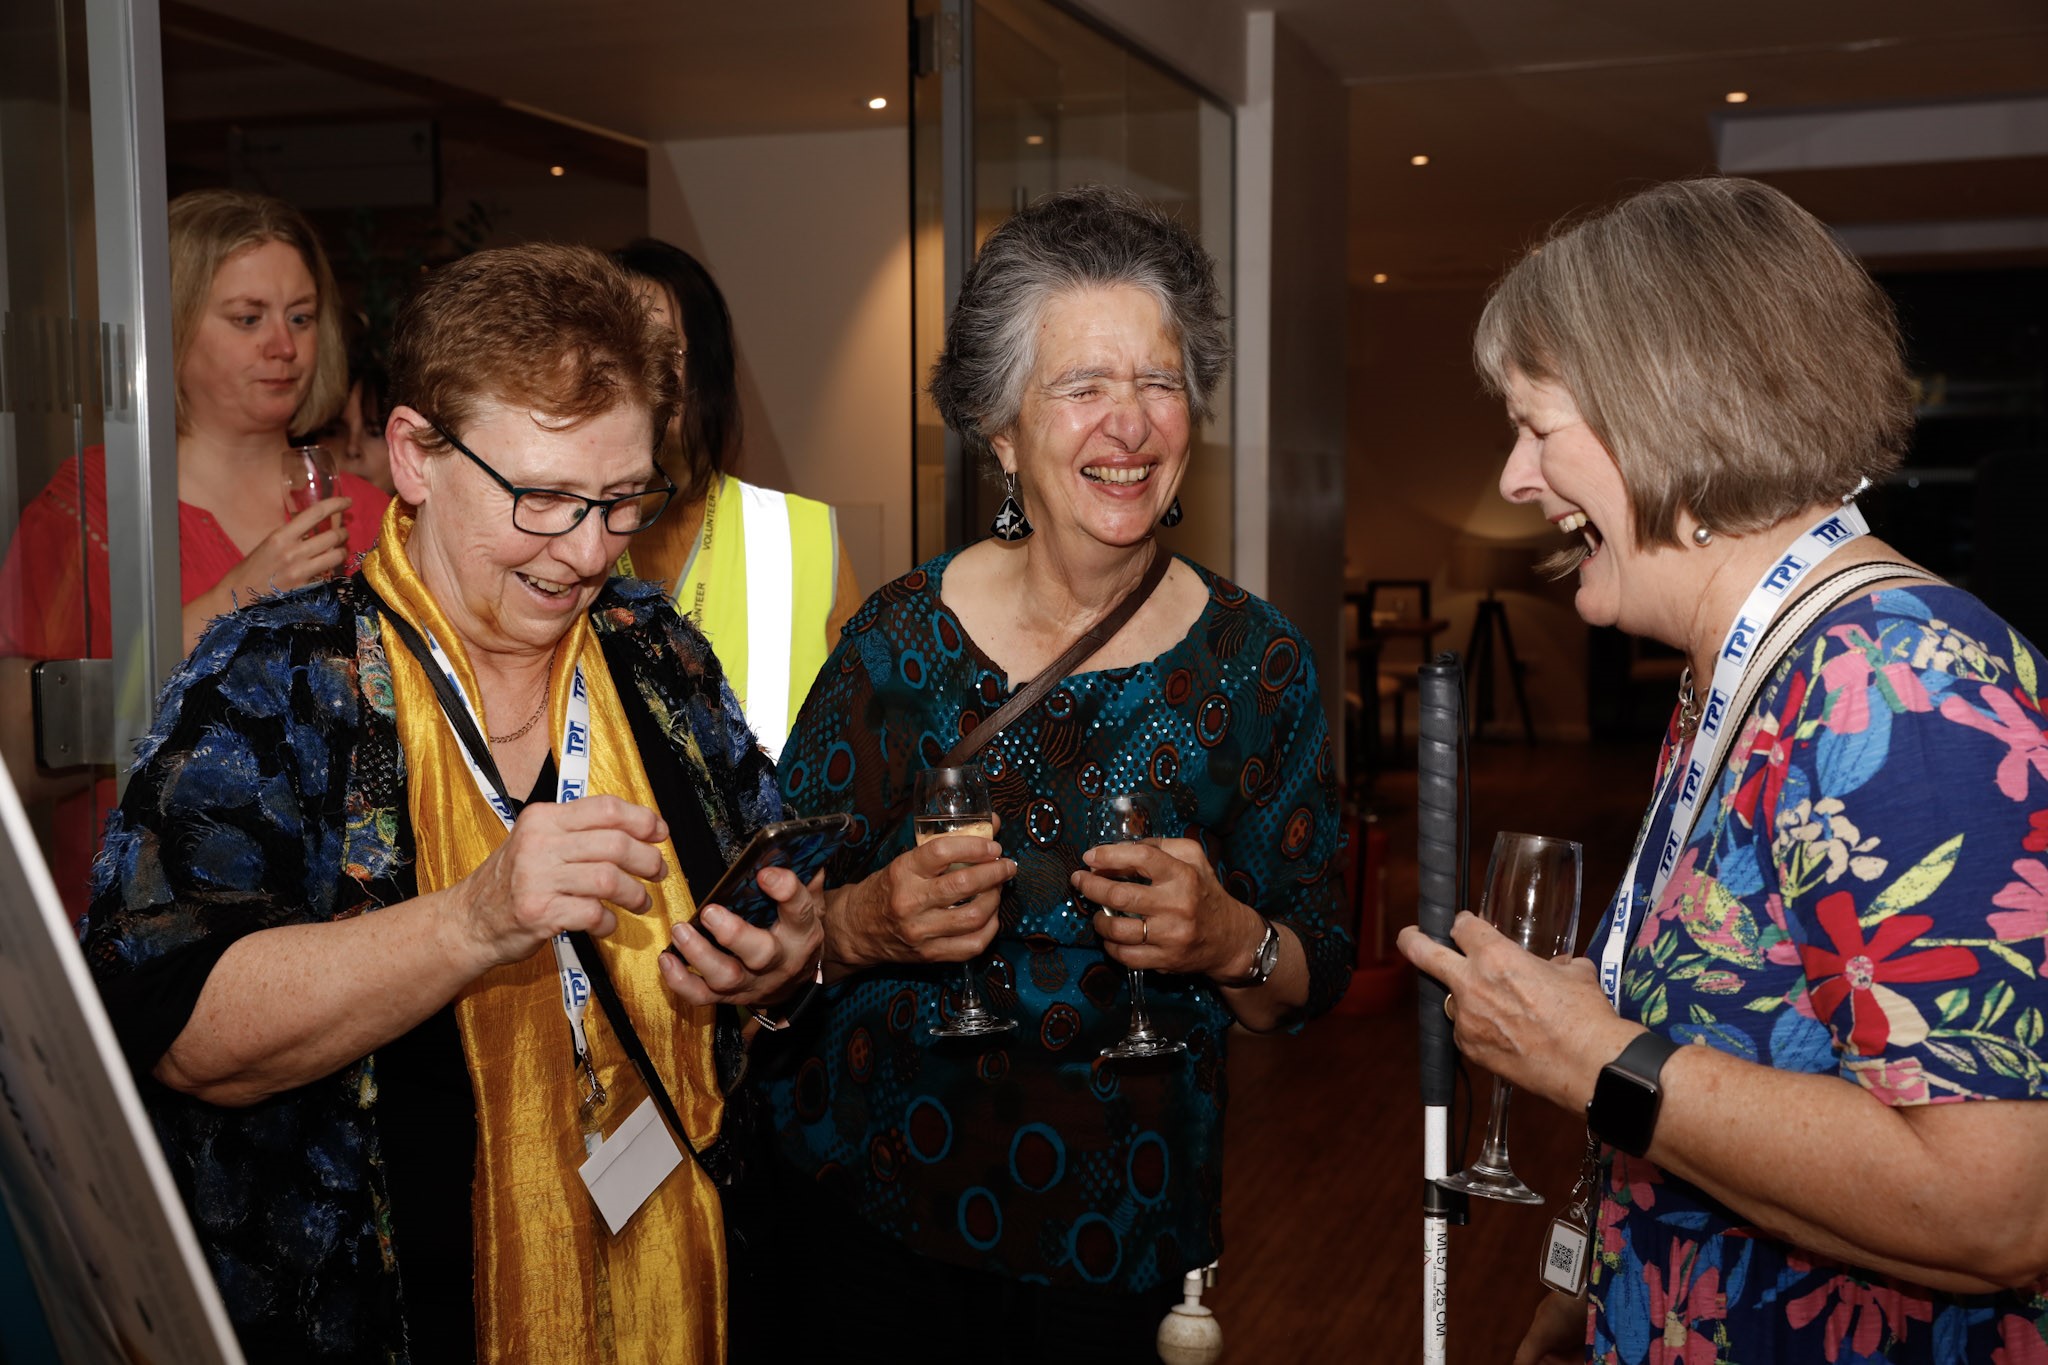 Lesley Robinson, Anna Baldwin, and Josie Clark, North Yorkshire SLC members. They are pictures talking to each other, laughing, at the Rodney Powell Awards.